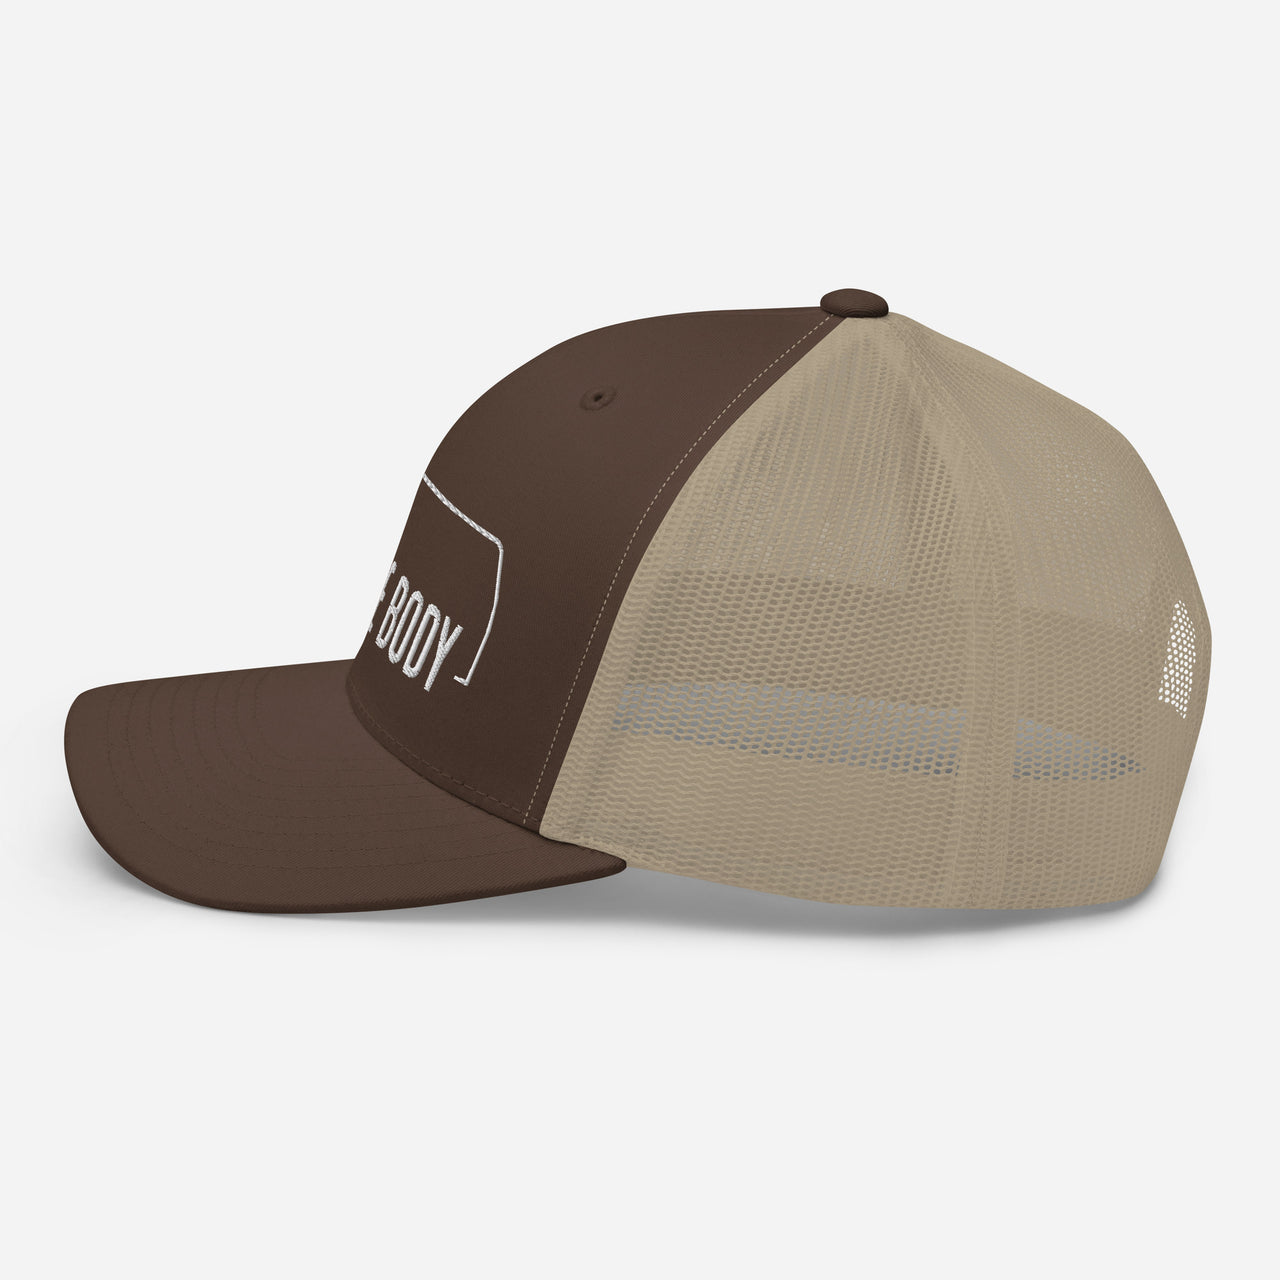 side view of a Square body K5 blazer trucker hat from aggressive thread in brown